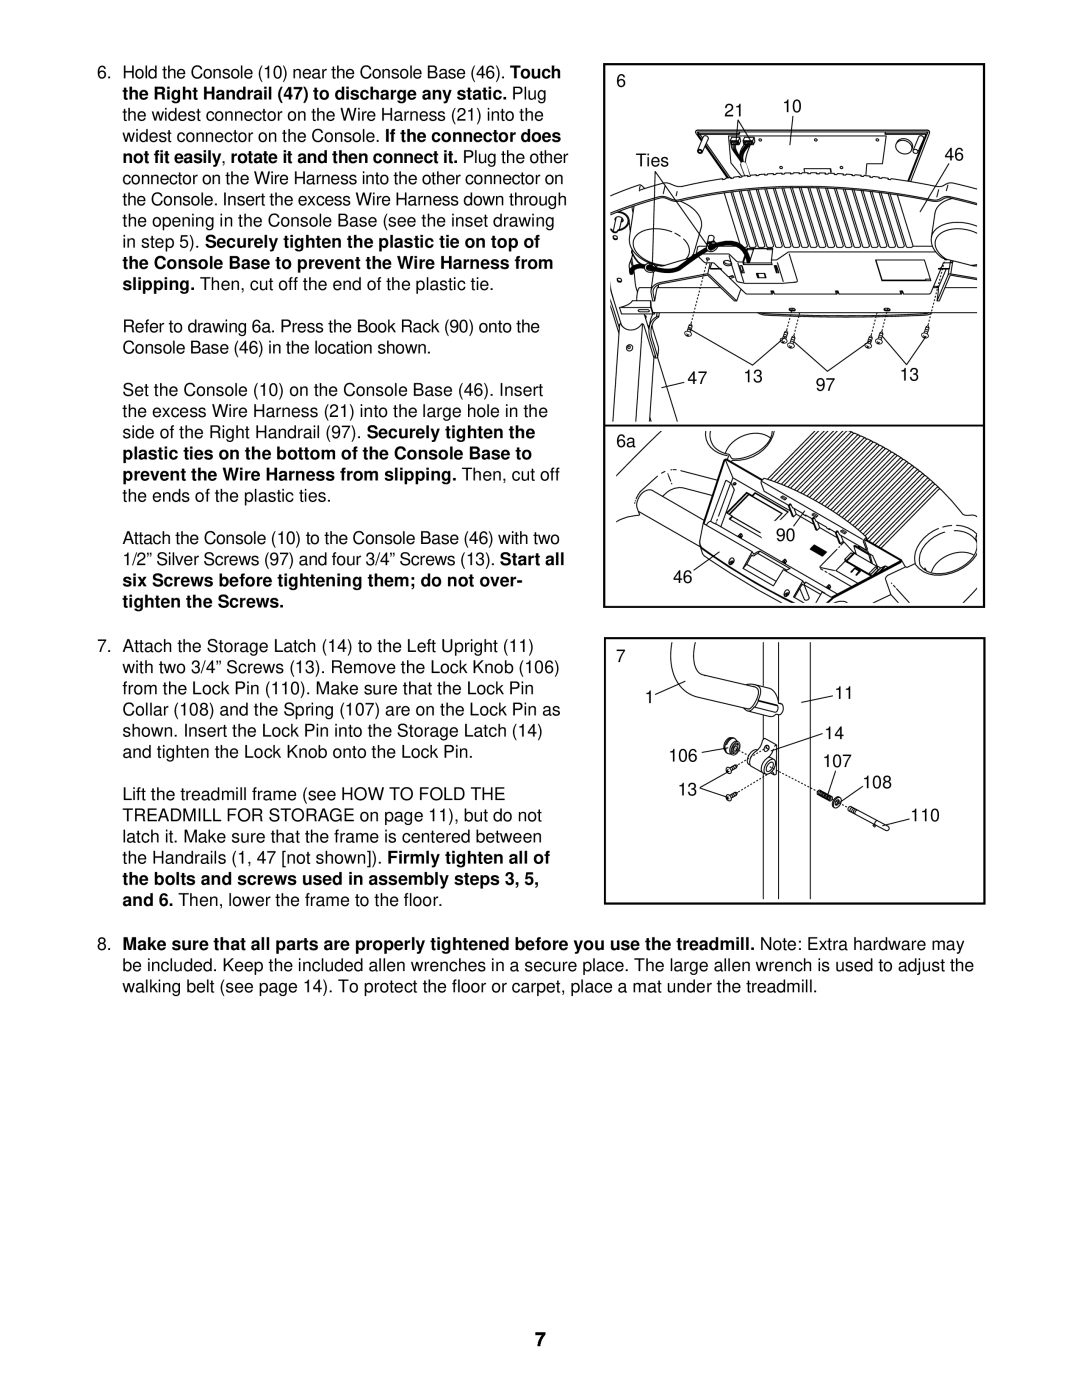 ProForm 831.293230 user manual prevent the Wire Harness from slipping, tighten the Screws 